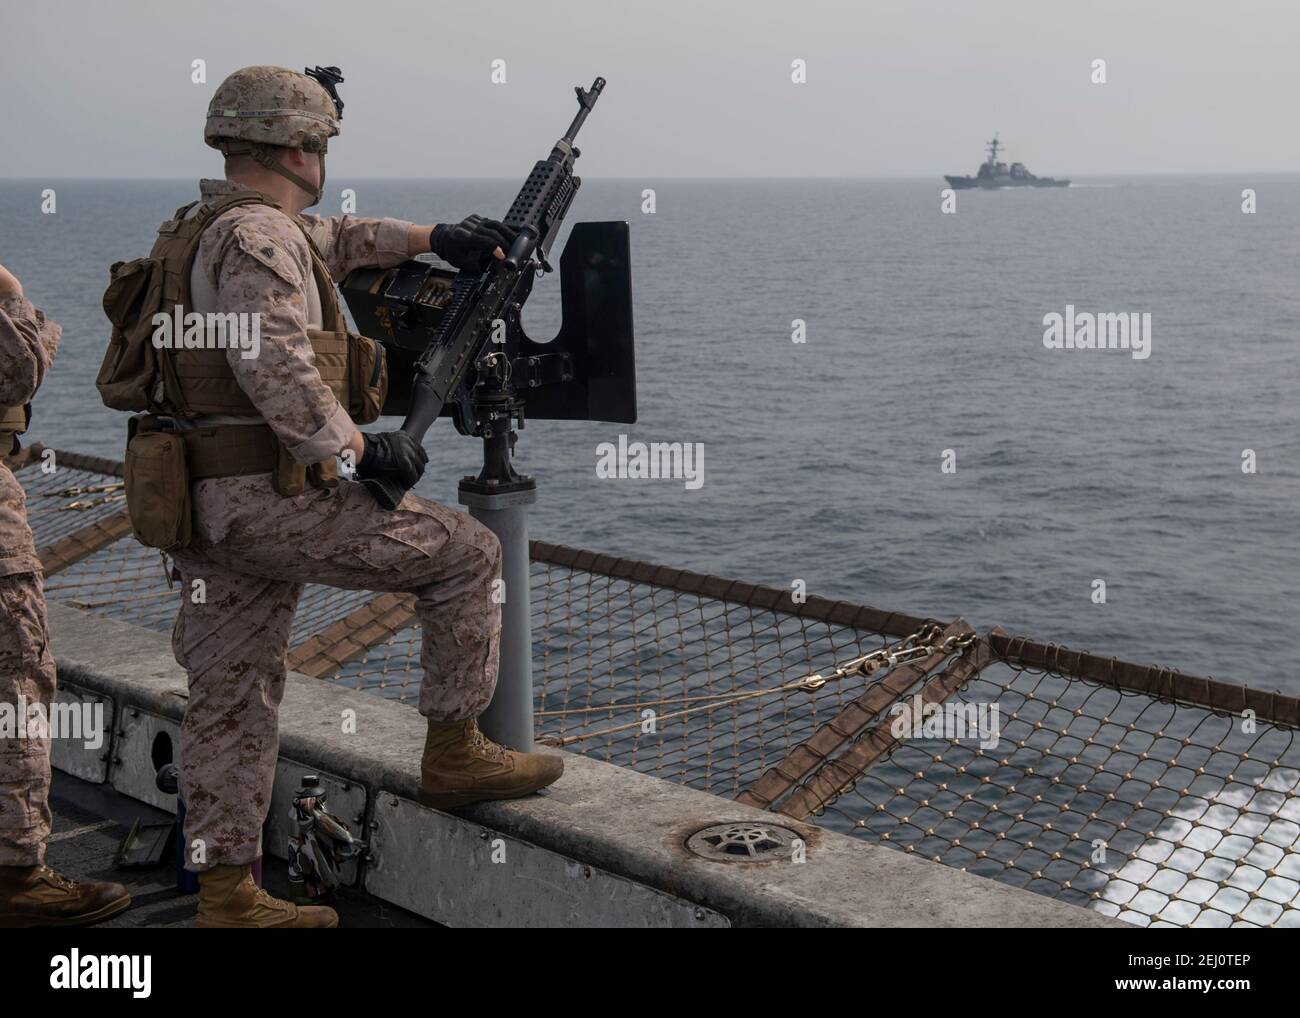 A U.S. Marine with the 15th Marine Expeditionary Unit, stands security watch aboard the U.S. Navy San Antonio-class amphibious transport dock ship USS San Diego, as they transit the Strait of Hormuz February 19, 2021 off the coast of Oman. Stock Photo